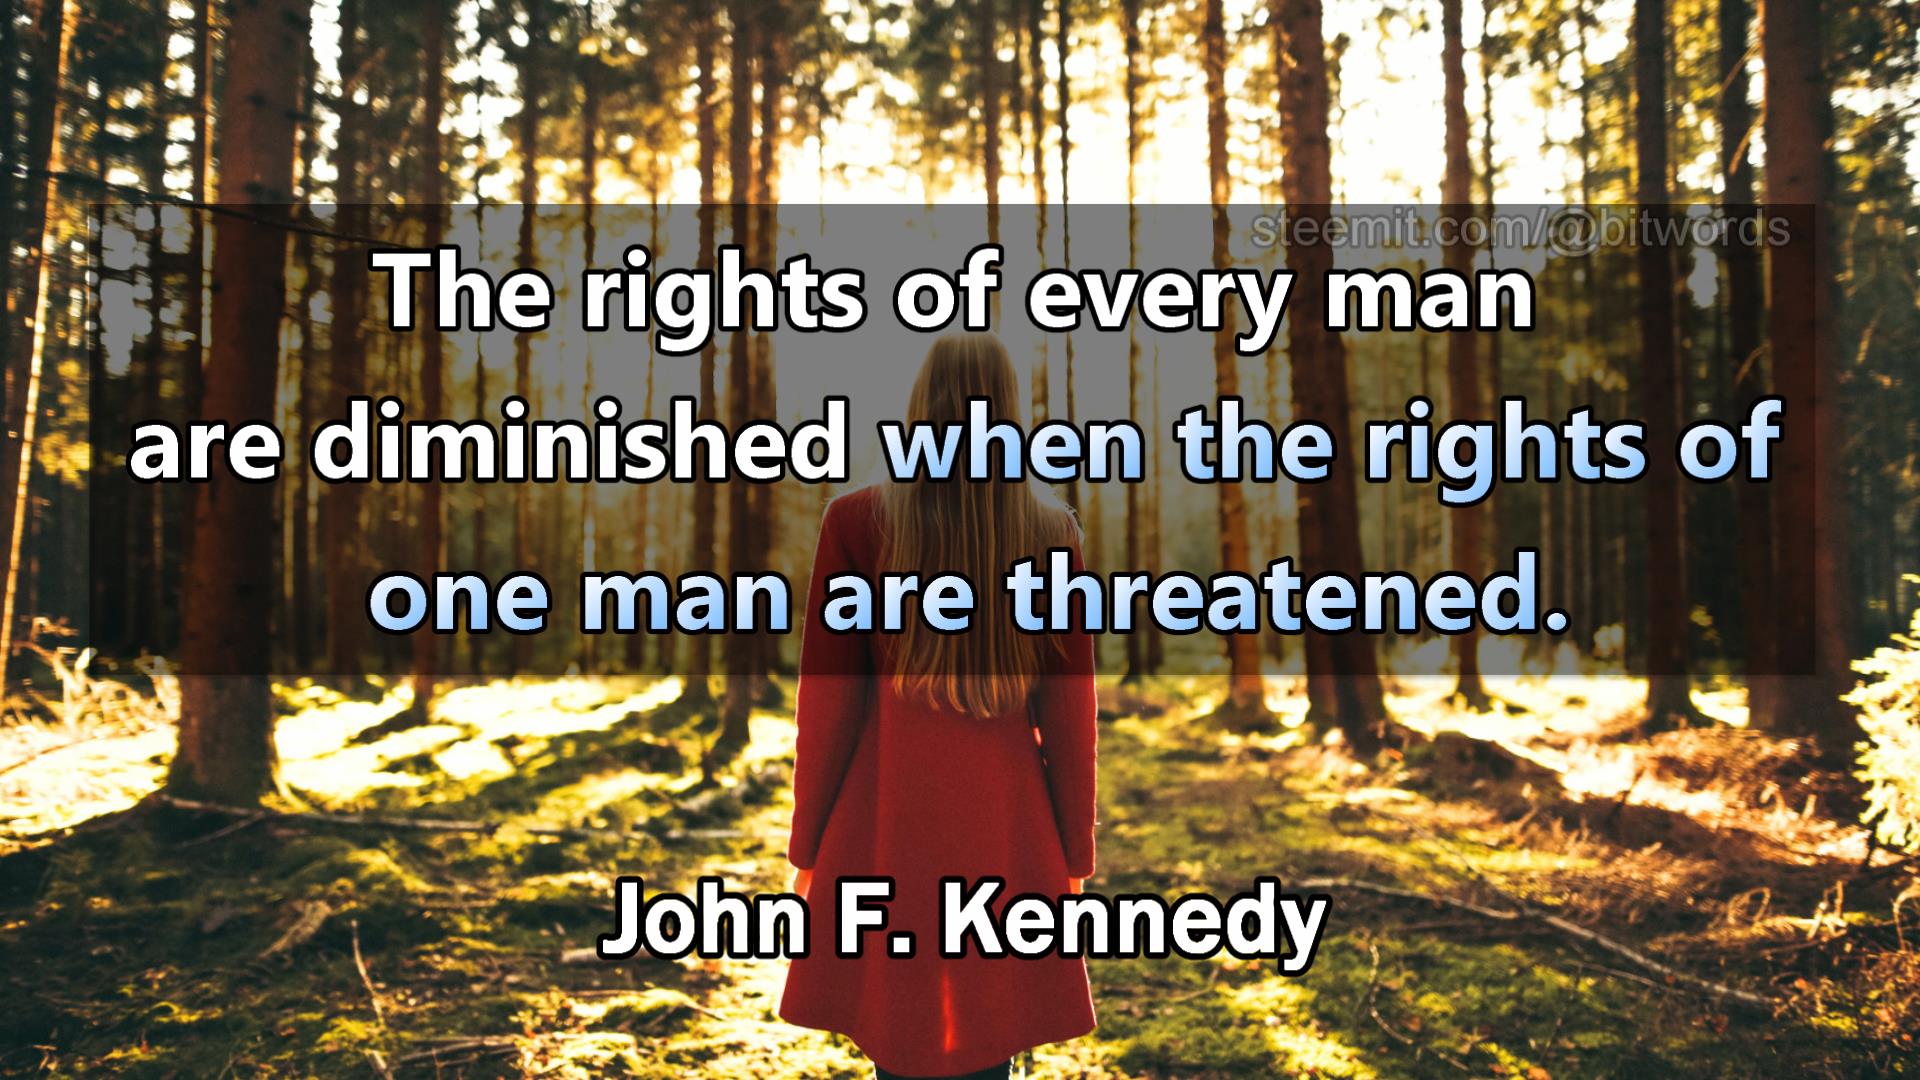 bitwords steemit quote of the day john kennedy.jpg